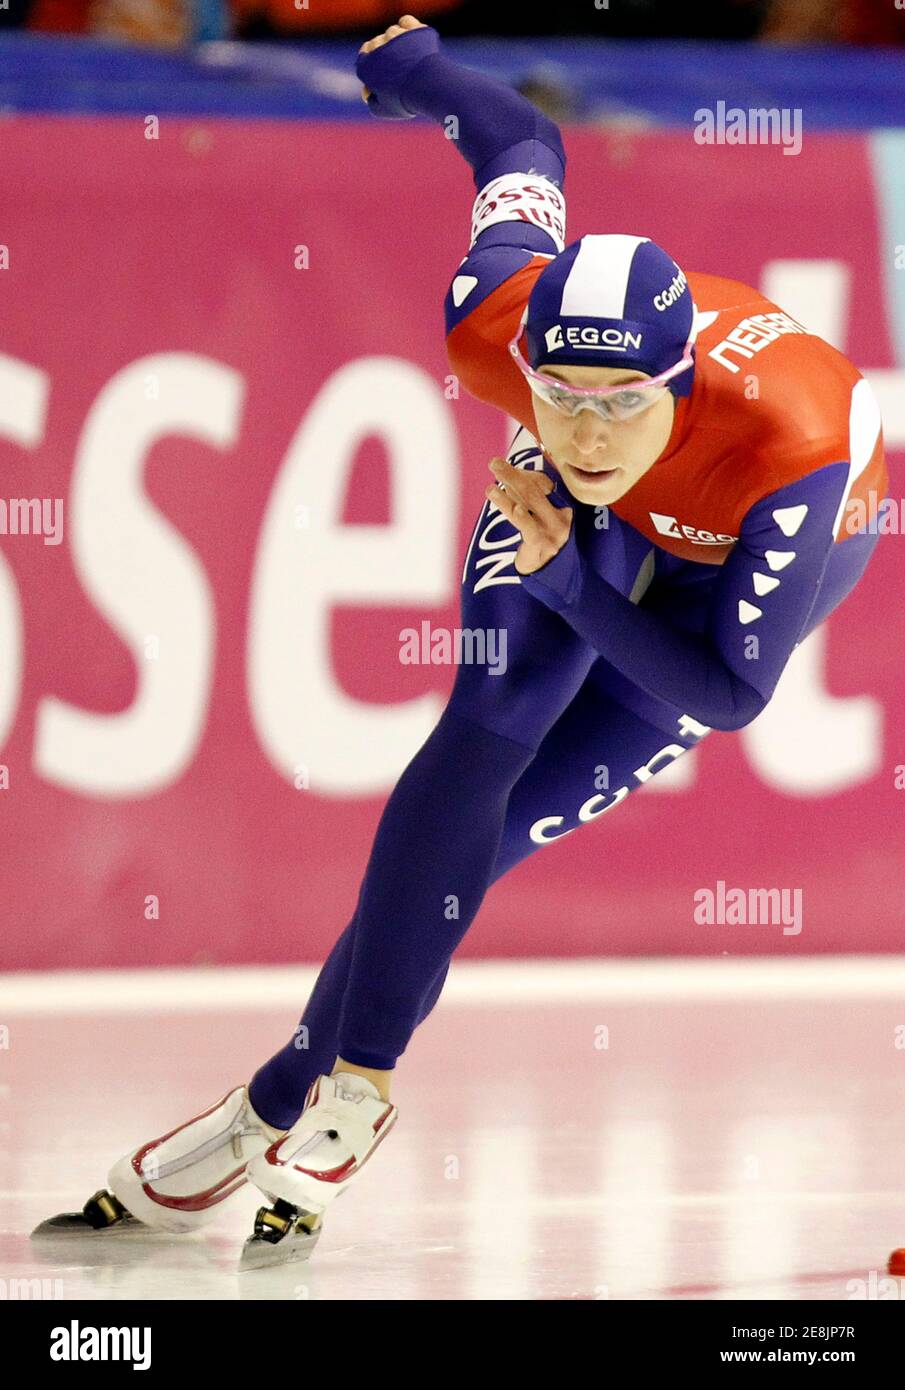 Netherlands' Annette Gerritsen competes in the women's 500 meters ISU World Cup Speed Skating finals race at the Thialf Stadium in Heerenveen March 12, 2010.   REUTERS/Jerry Lampen (NETHERLANDS - Tags: SPORT SPEED SKATING) Stock Photo